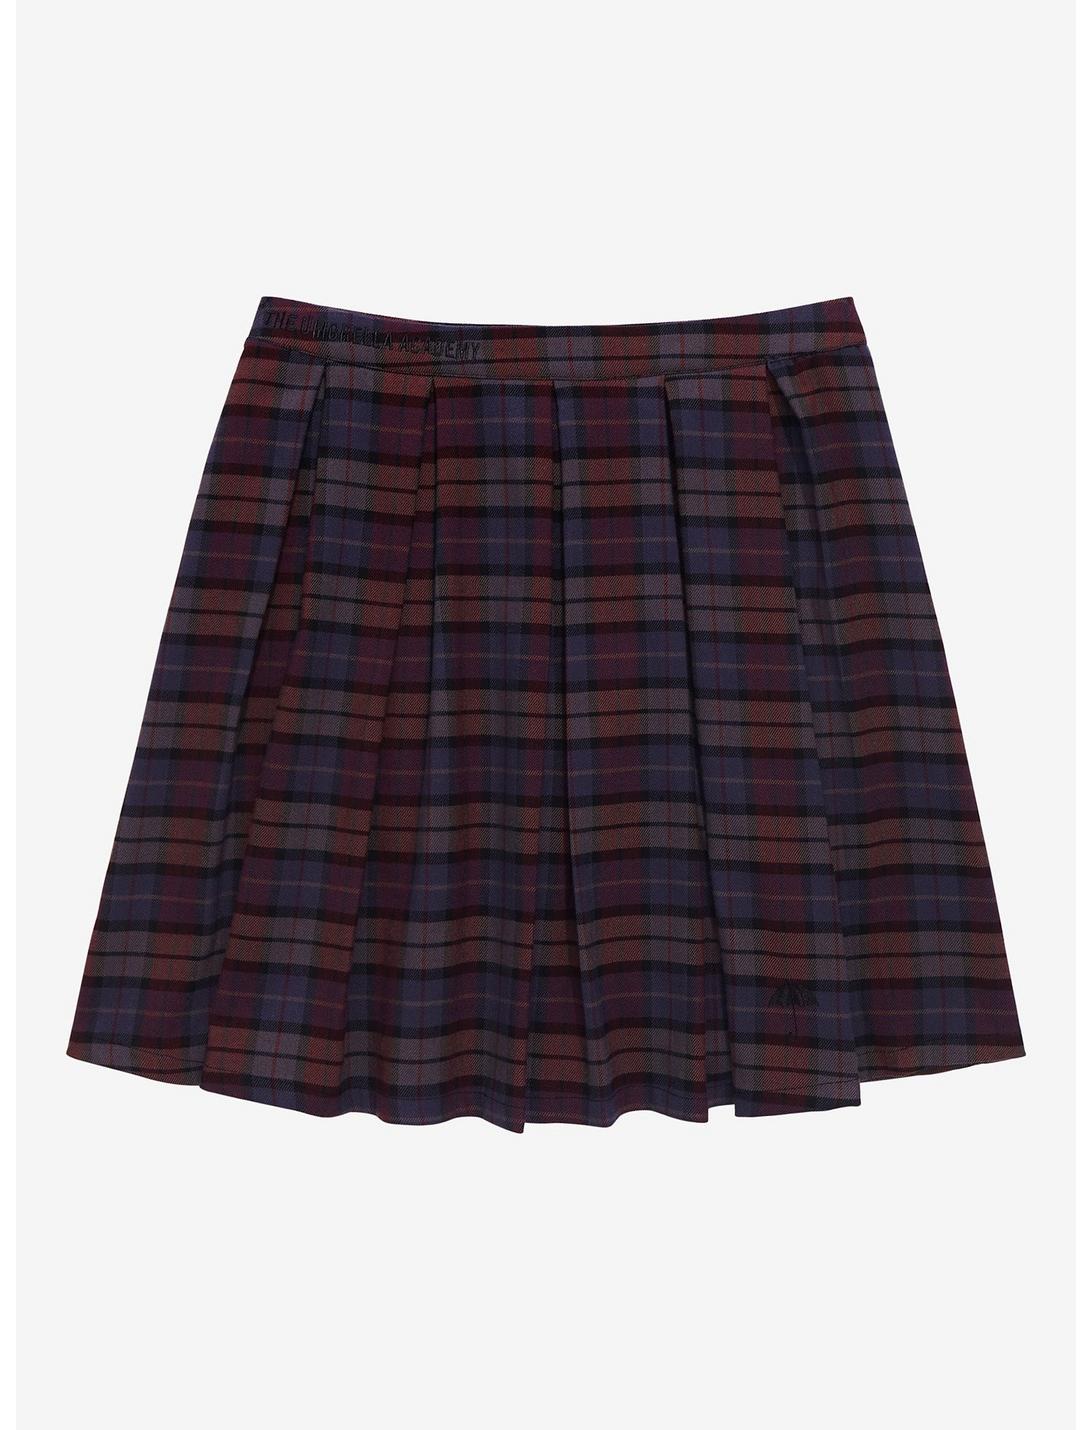 The Umbrella Academy Plaid Pleated Skirt Plus Size | Hot Topic